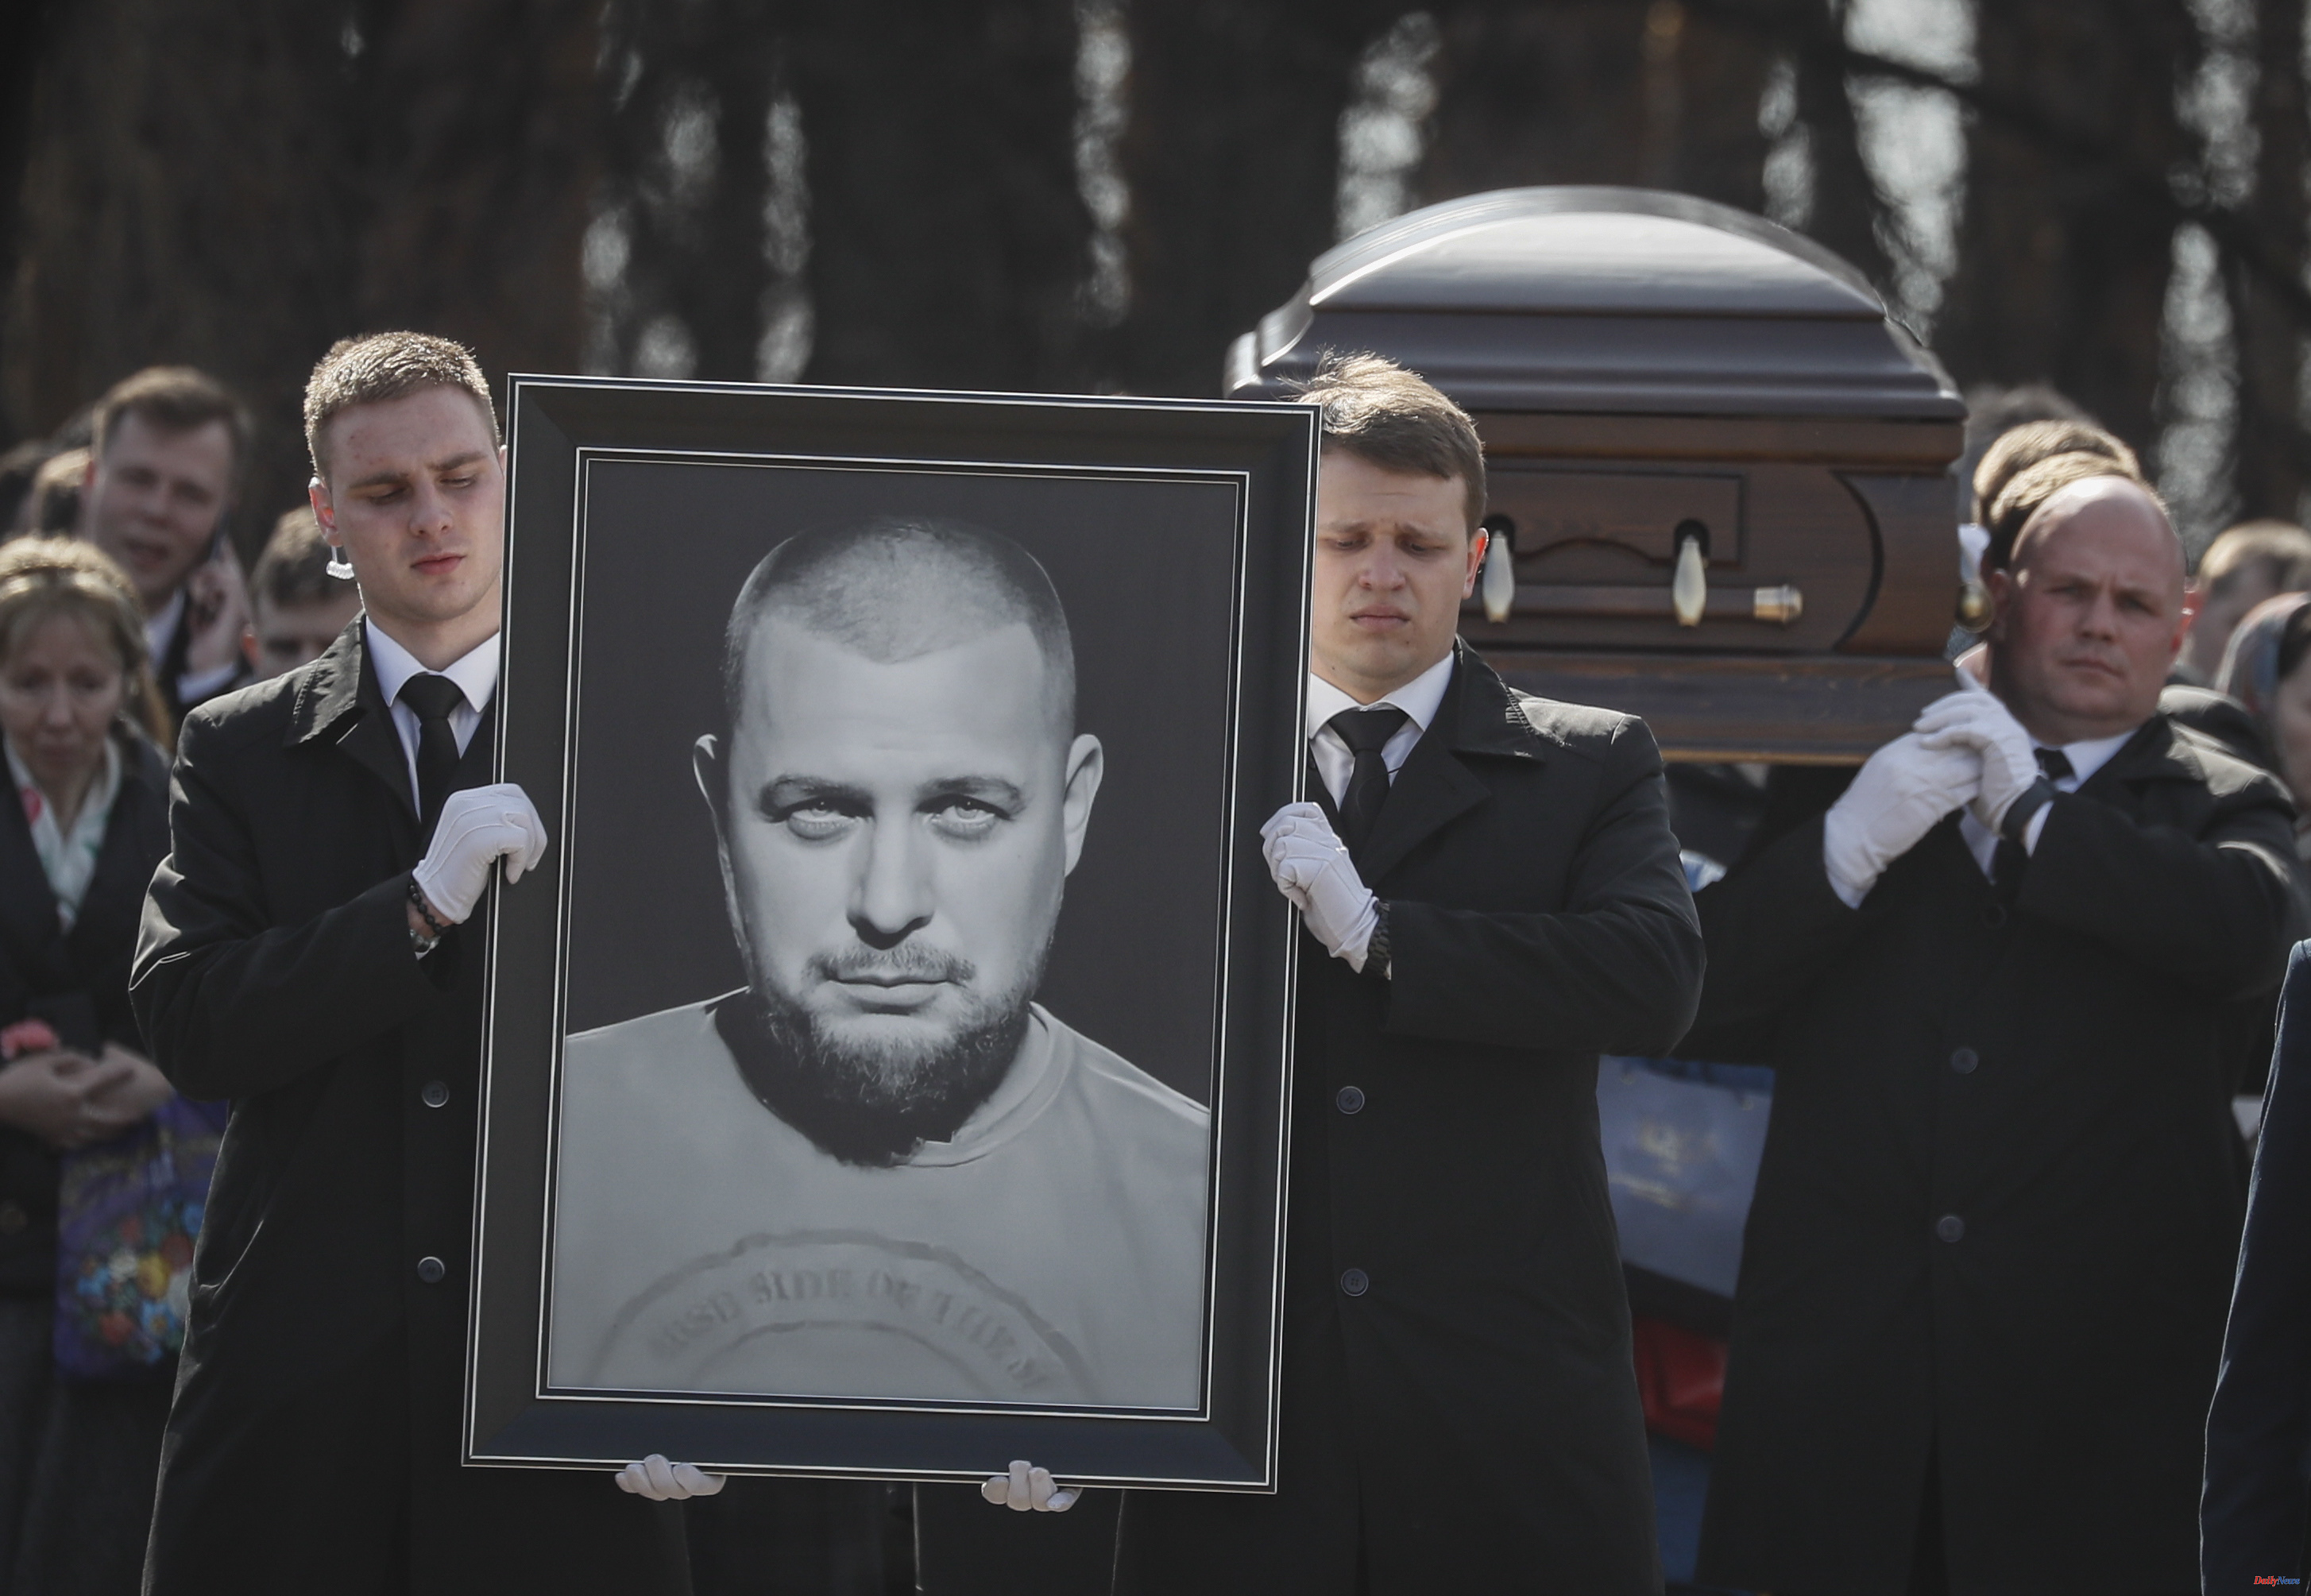 Ukraine-Russia War Hundreds of people, including the head of the Wagner group, bid farewell to the blogger killed in an attack in Saint Petersburg